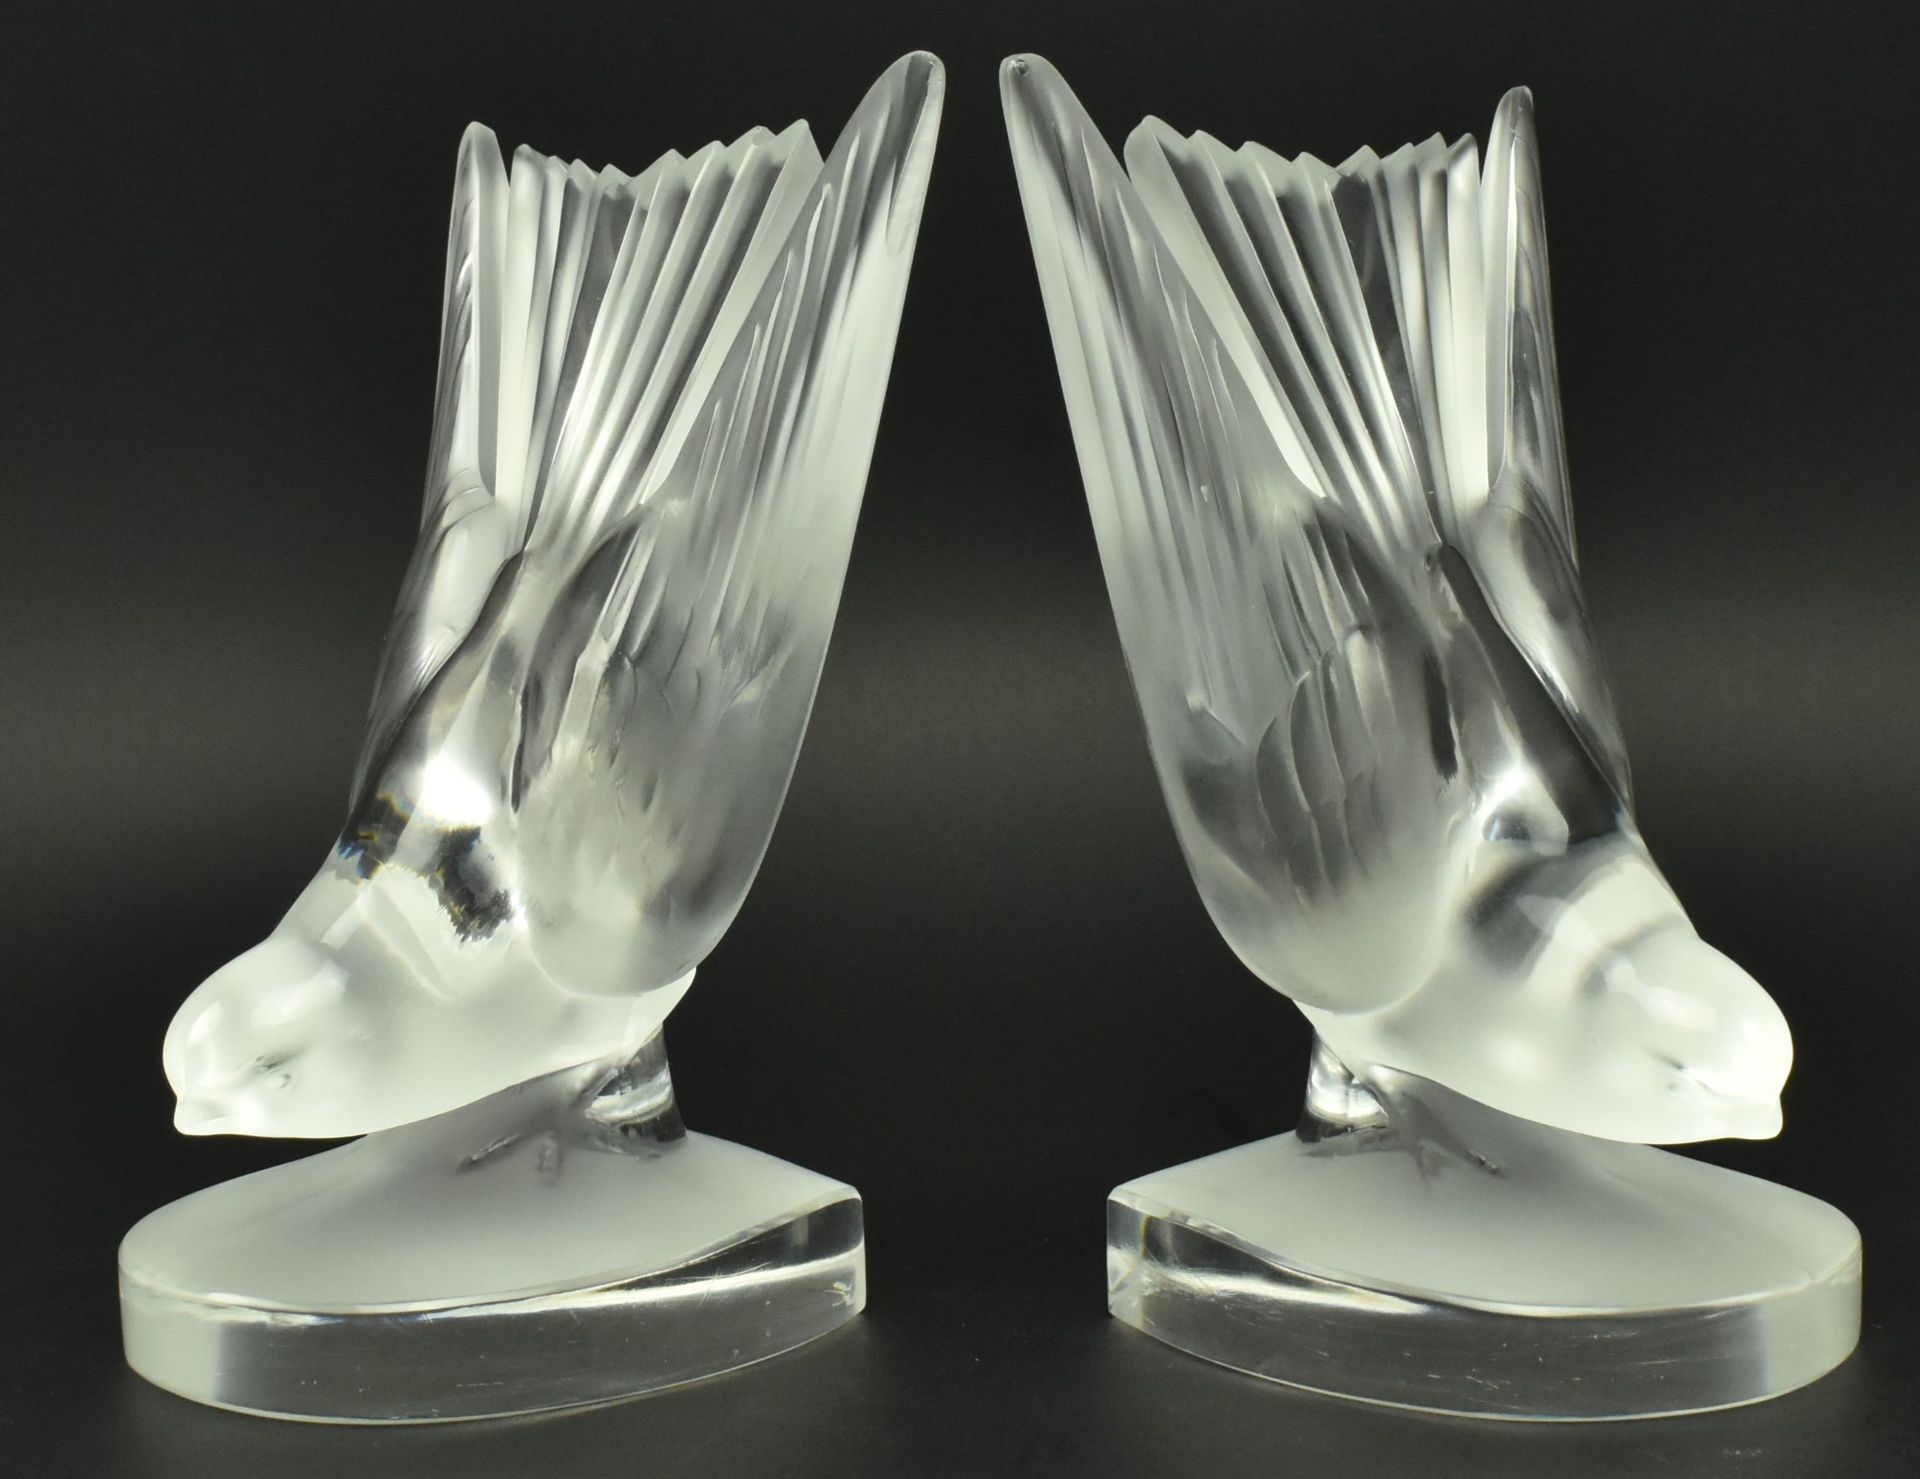 PAIR OF LALIQUE 20TH CENTURY 1970S GLASS HIRONDELLE BOOK ENDS - Image 4 of 6